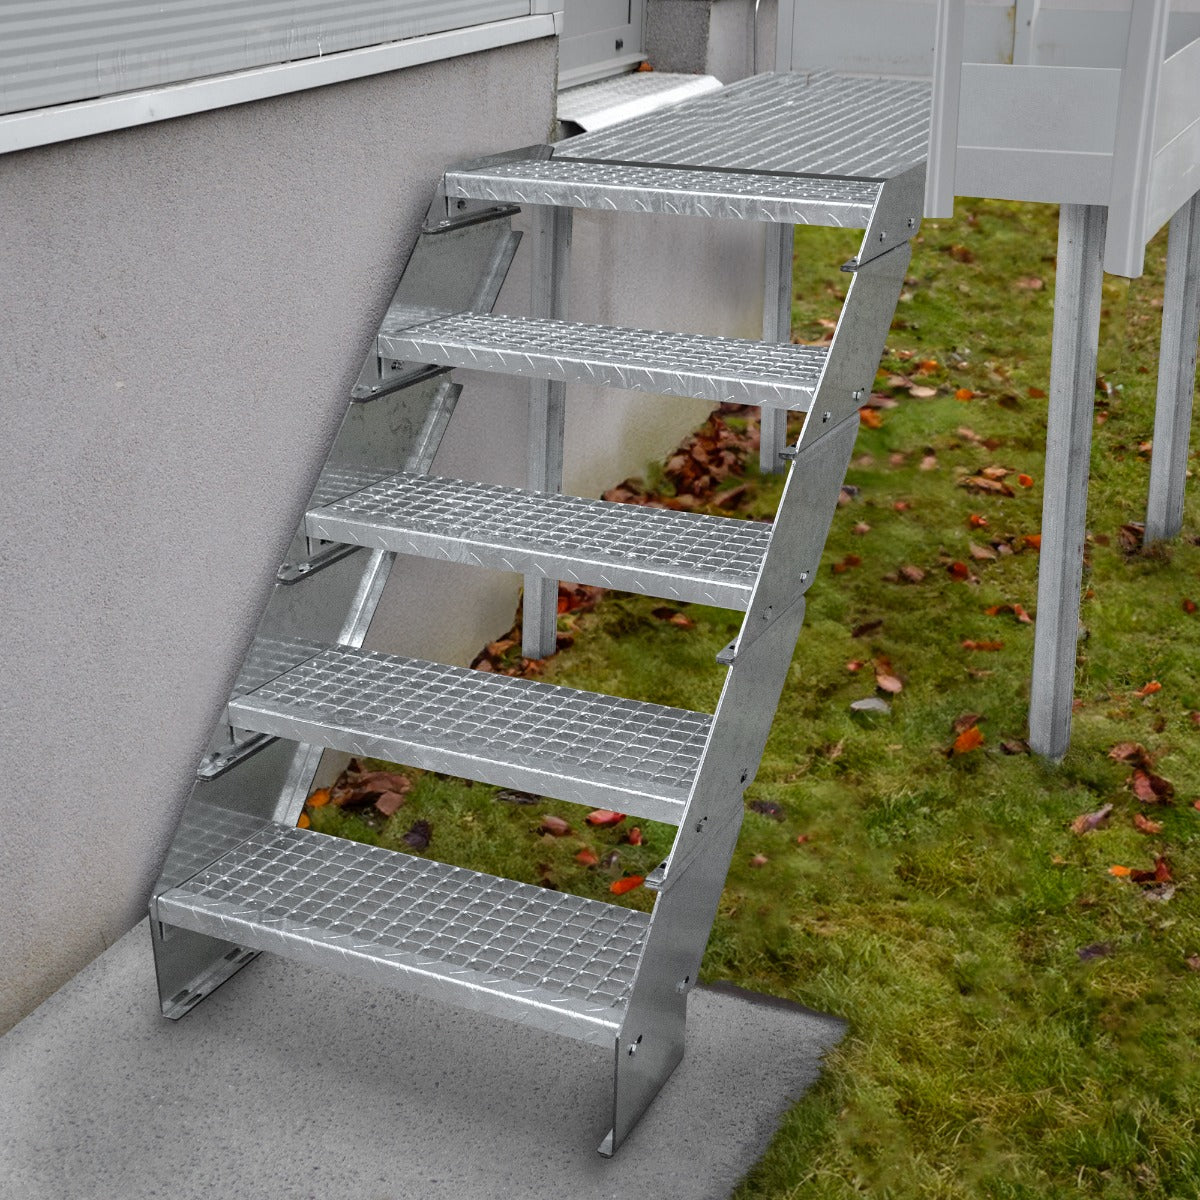 Adjustable 10 Section Galvanised Staircase - 600mm Wide